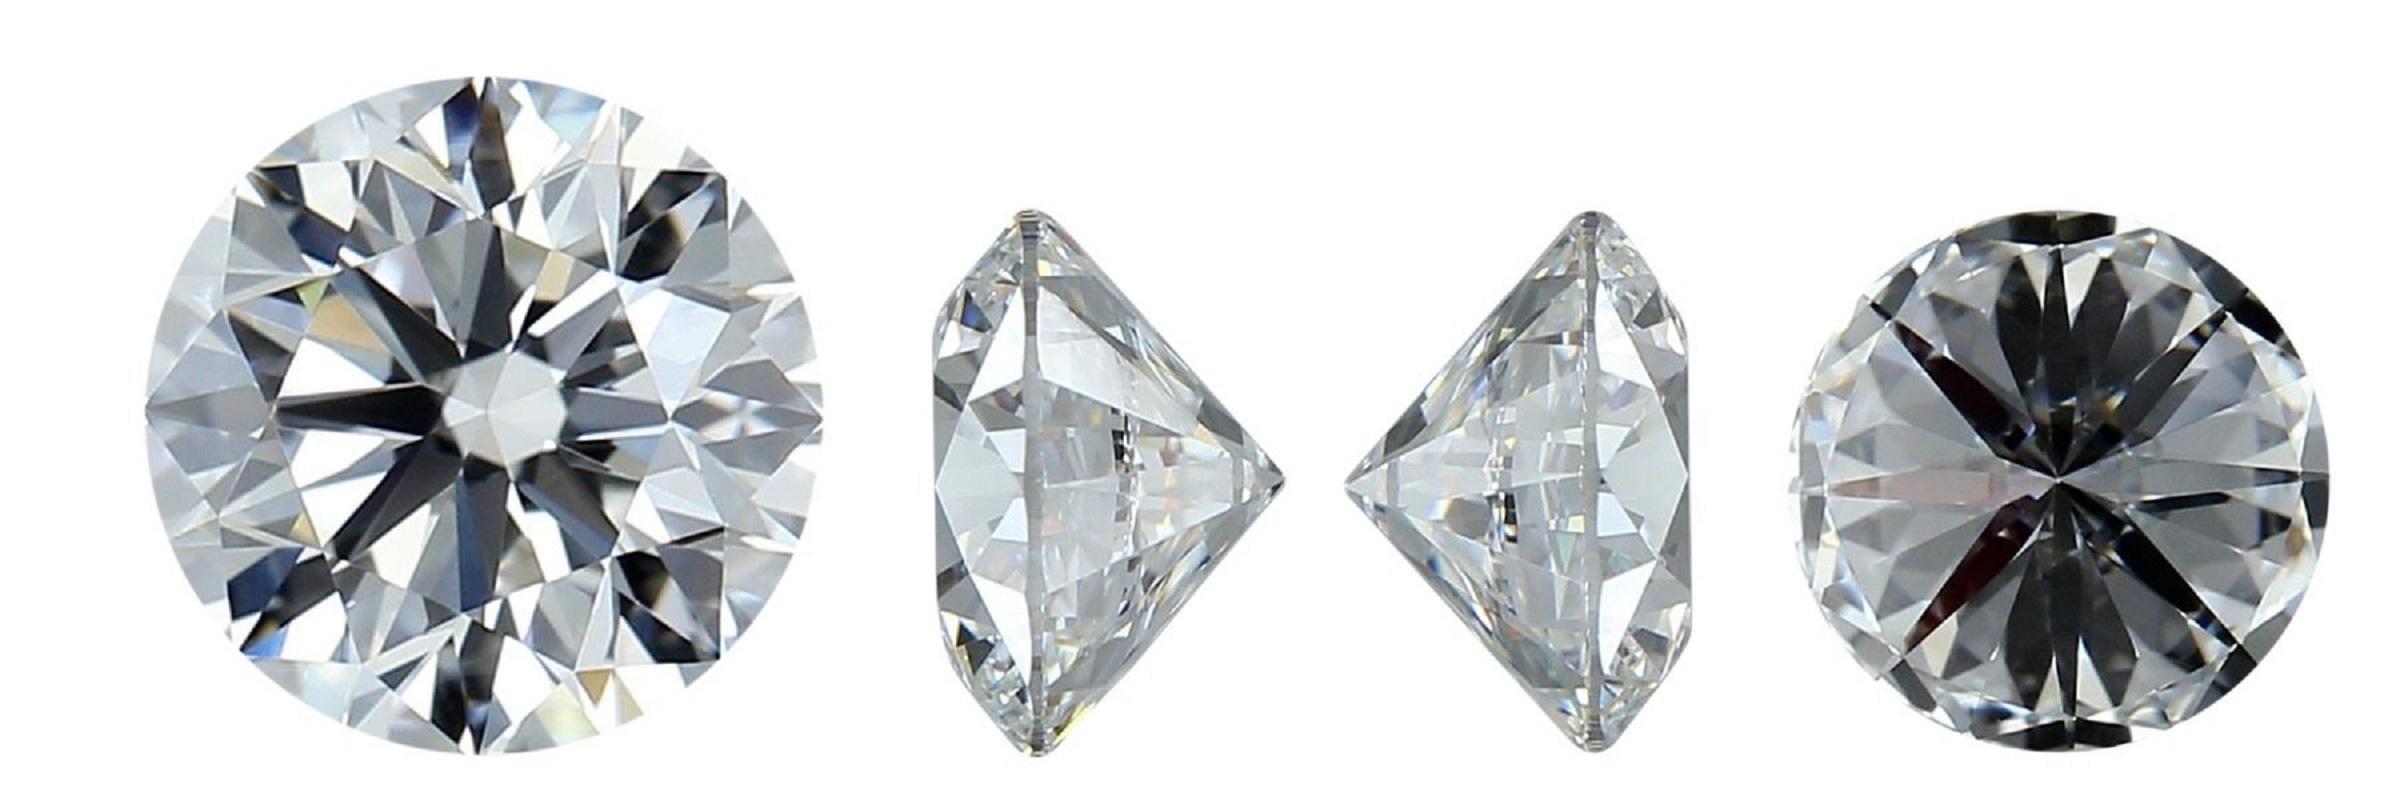 Round Cut 1 Pc Natural Diamonds, 0.91 Ct, Brilliant, G, IF 'Flawless', GIA Certificate For Sale